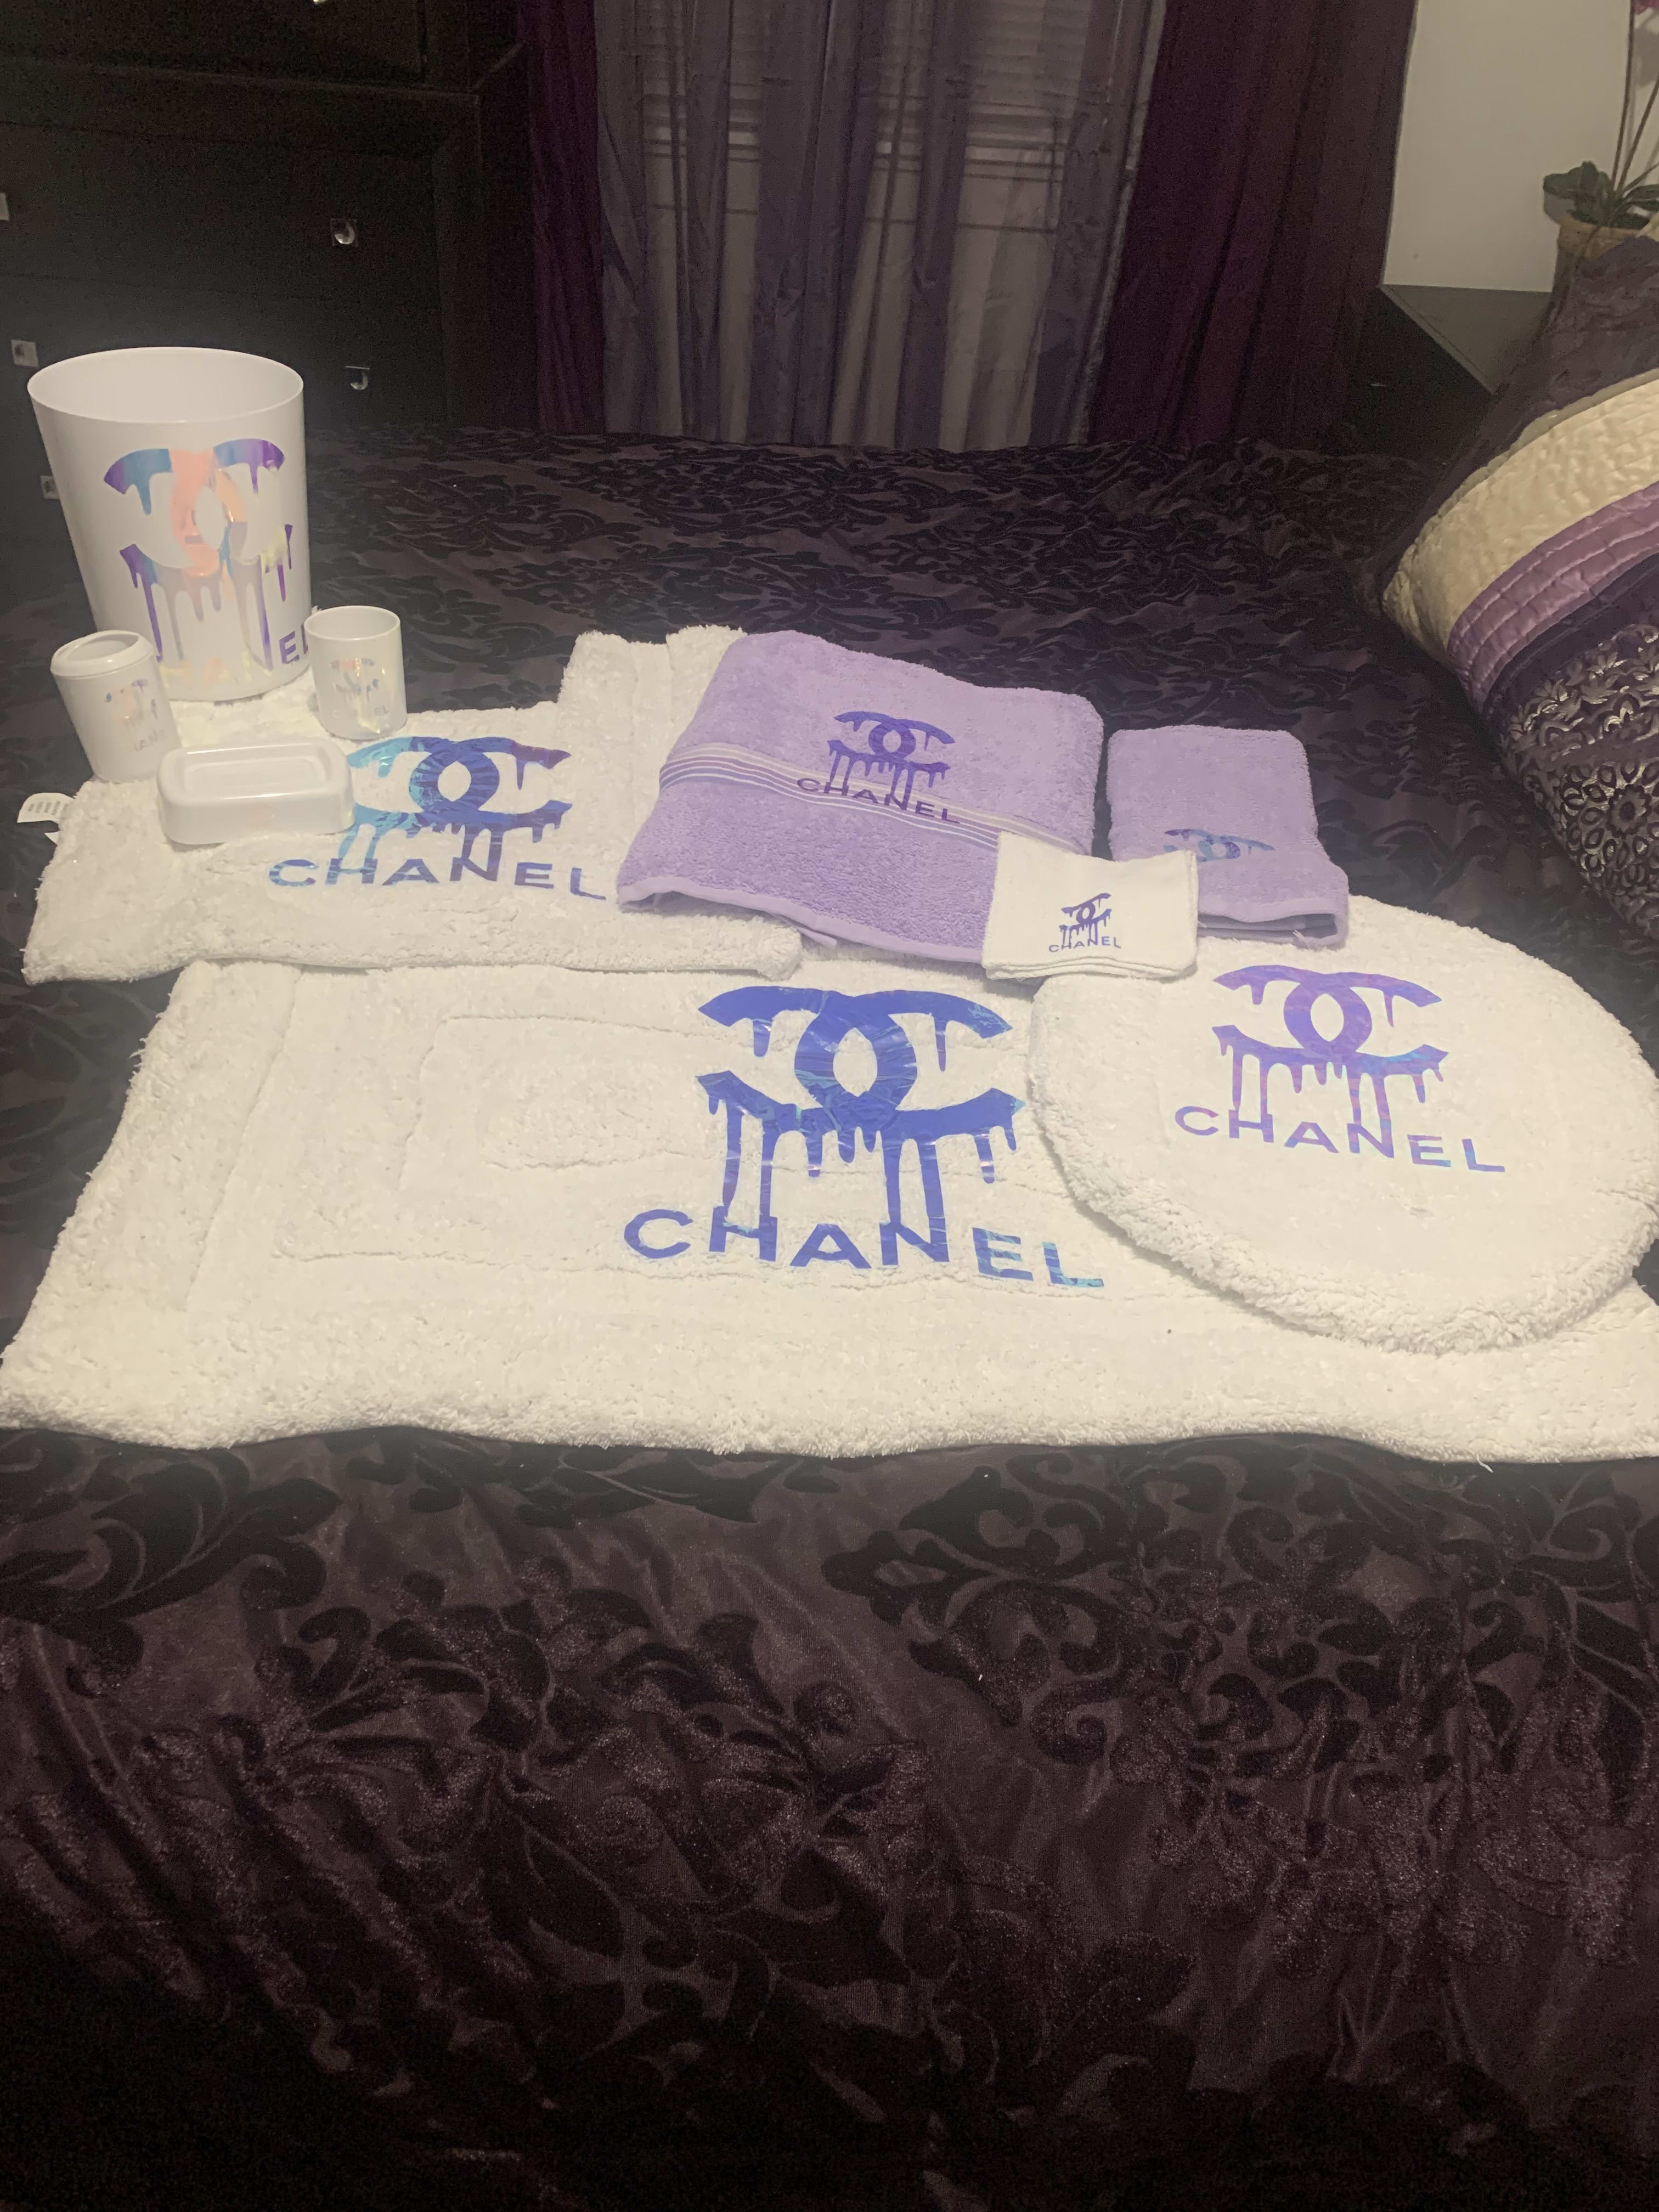 Deluxe Bathroom Set - Customized Items - Designs By D'Marie - Personal  Creations